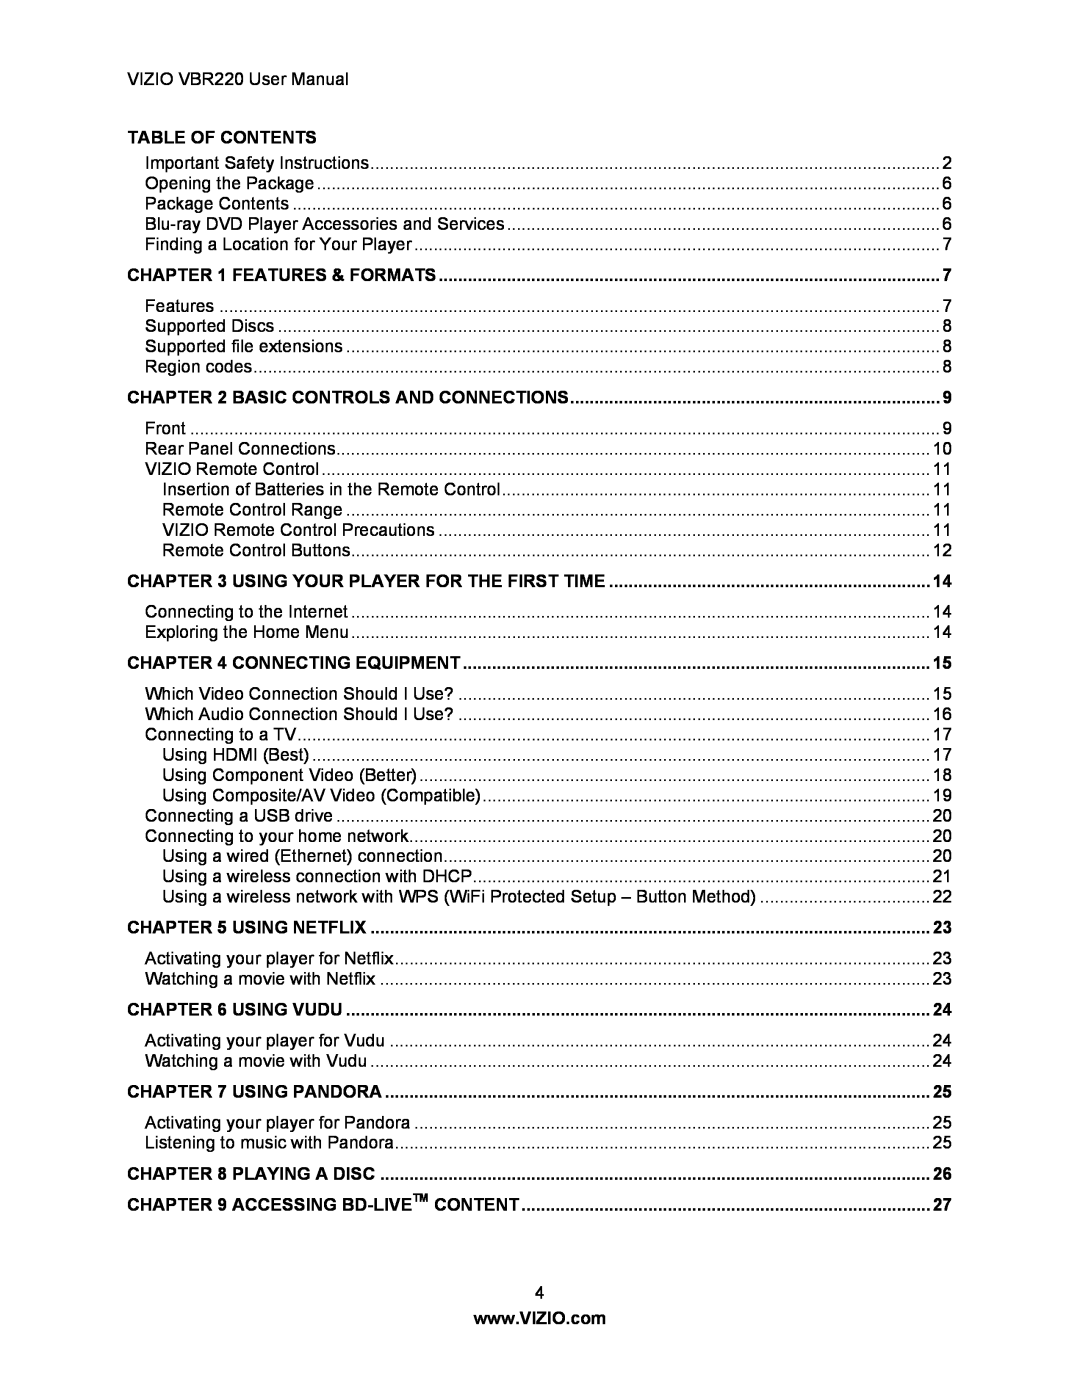 Panasonic VBR220 Table Of Contents, Features & Formats, Basic Controls And Connections, Connecting Equipment, Using Vudu 